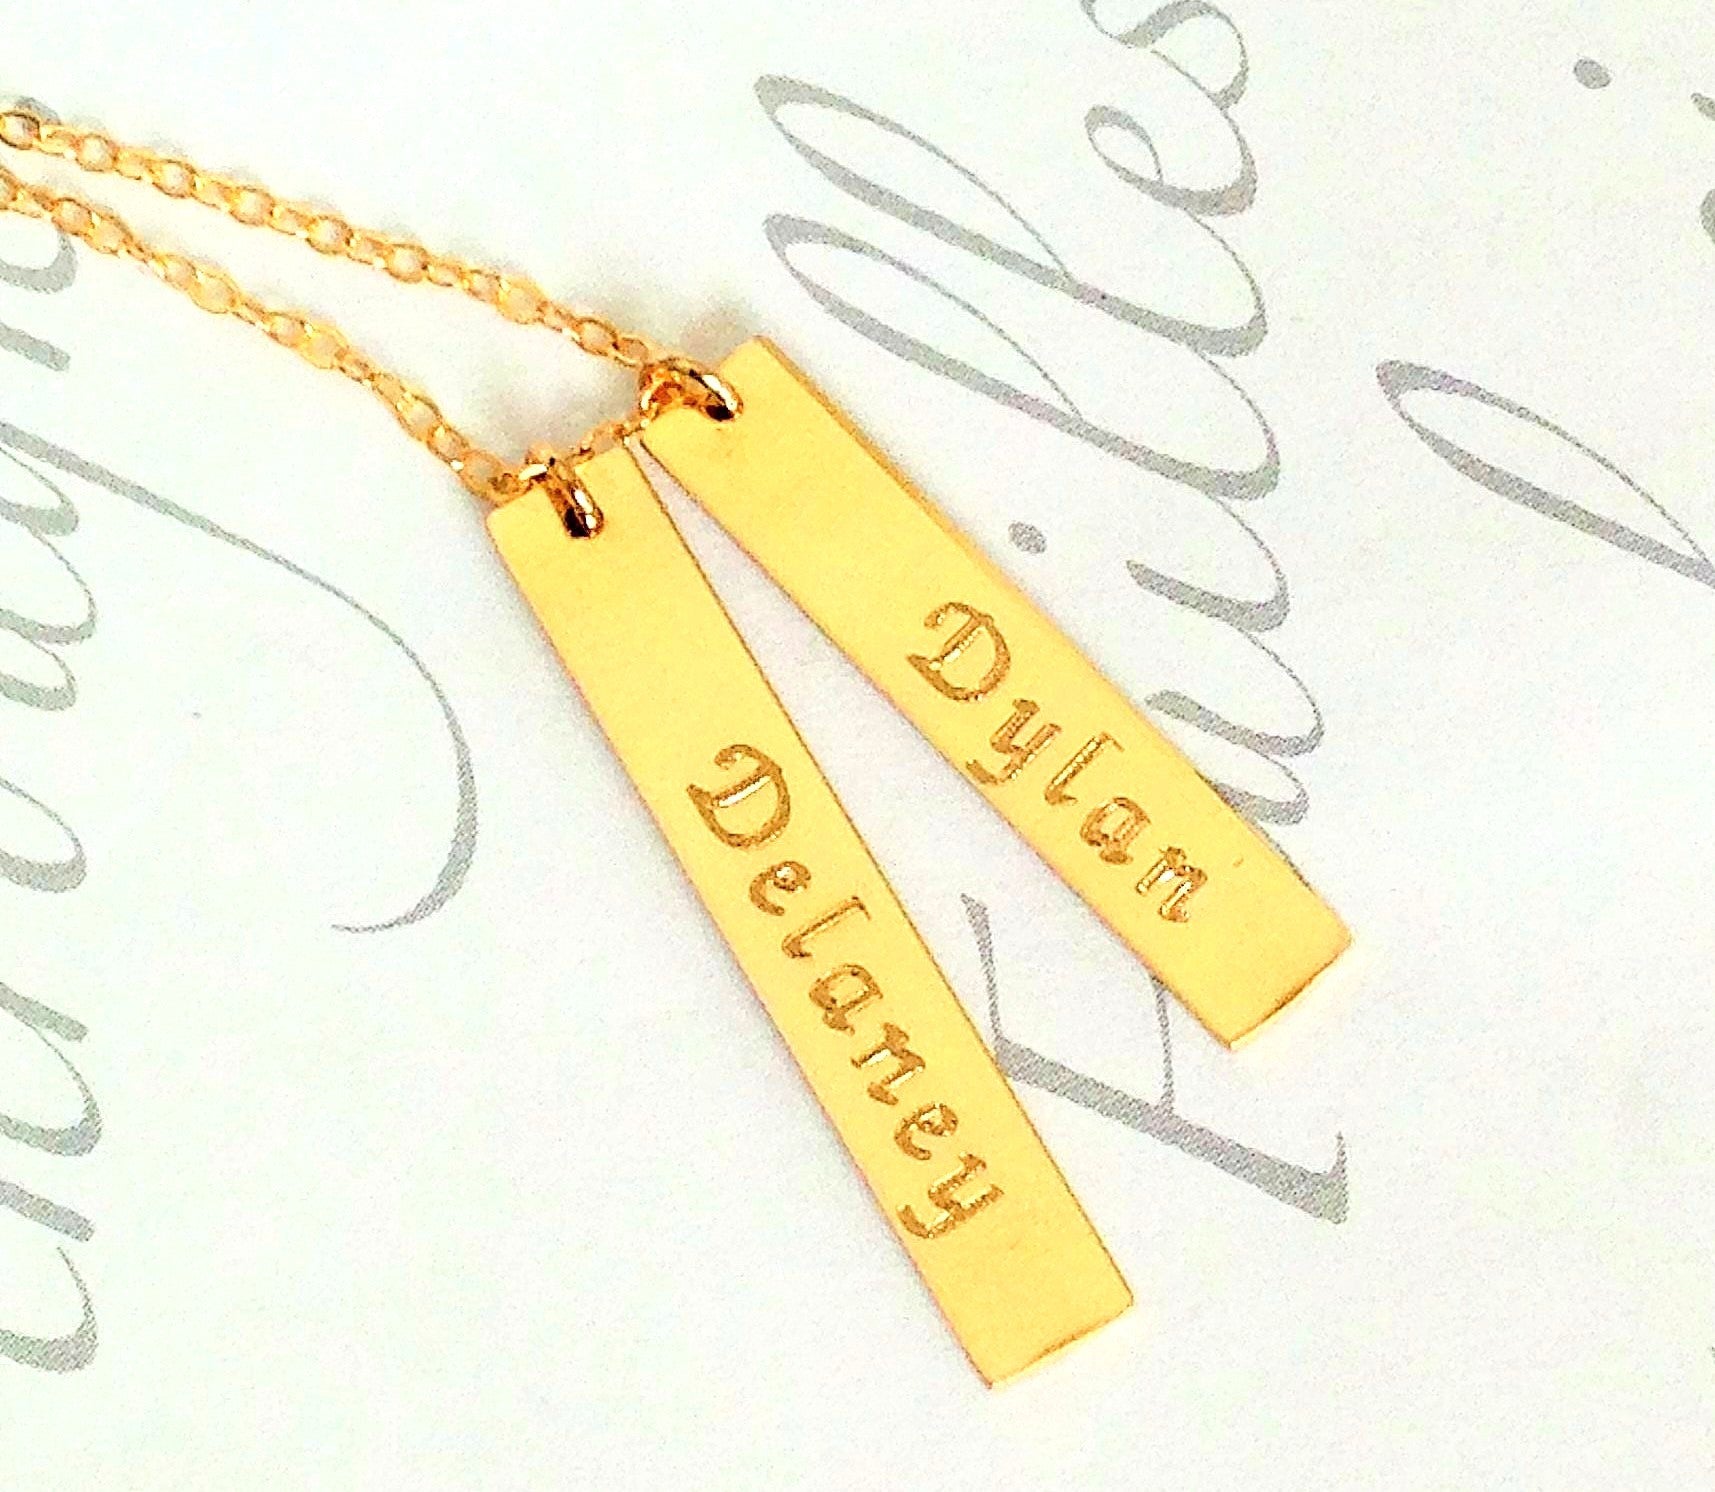 Engraved Gold Or Sterling Silver Bar Necklace Set Of 2 Bars Hanging T Lilladesigns